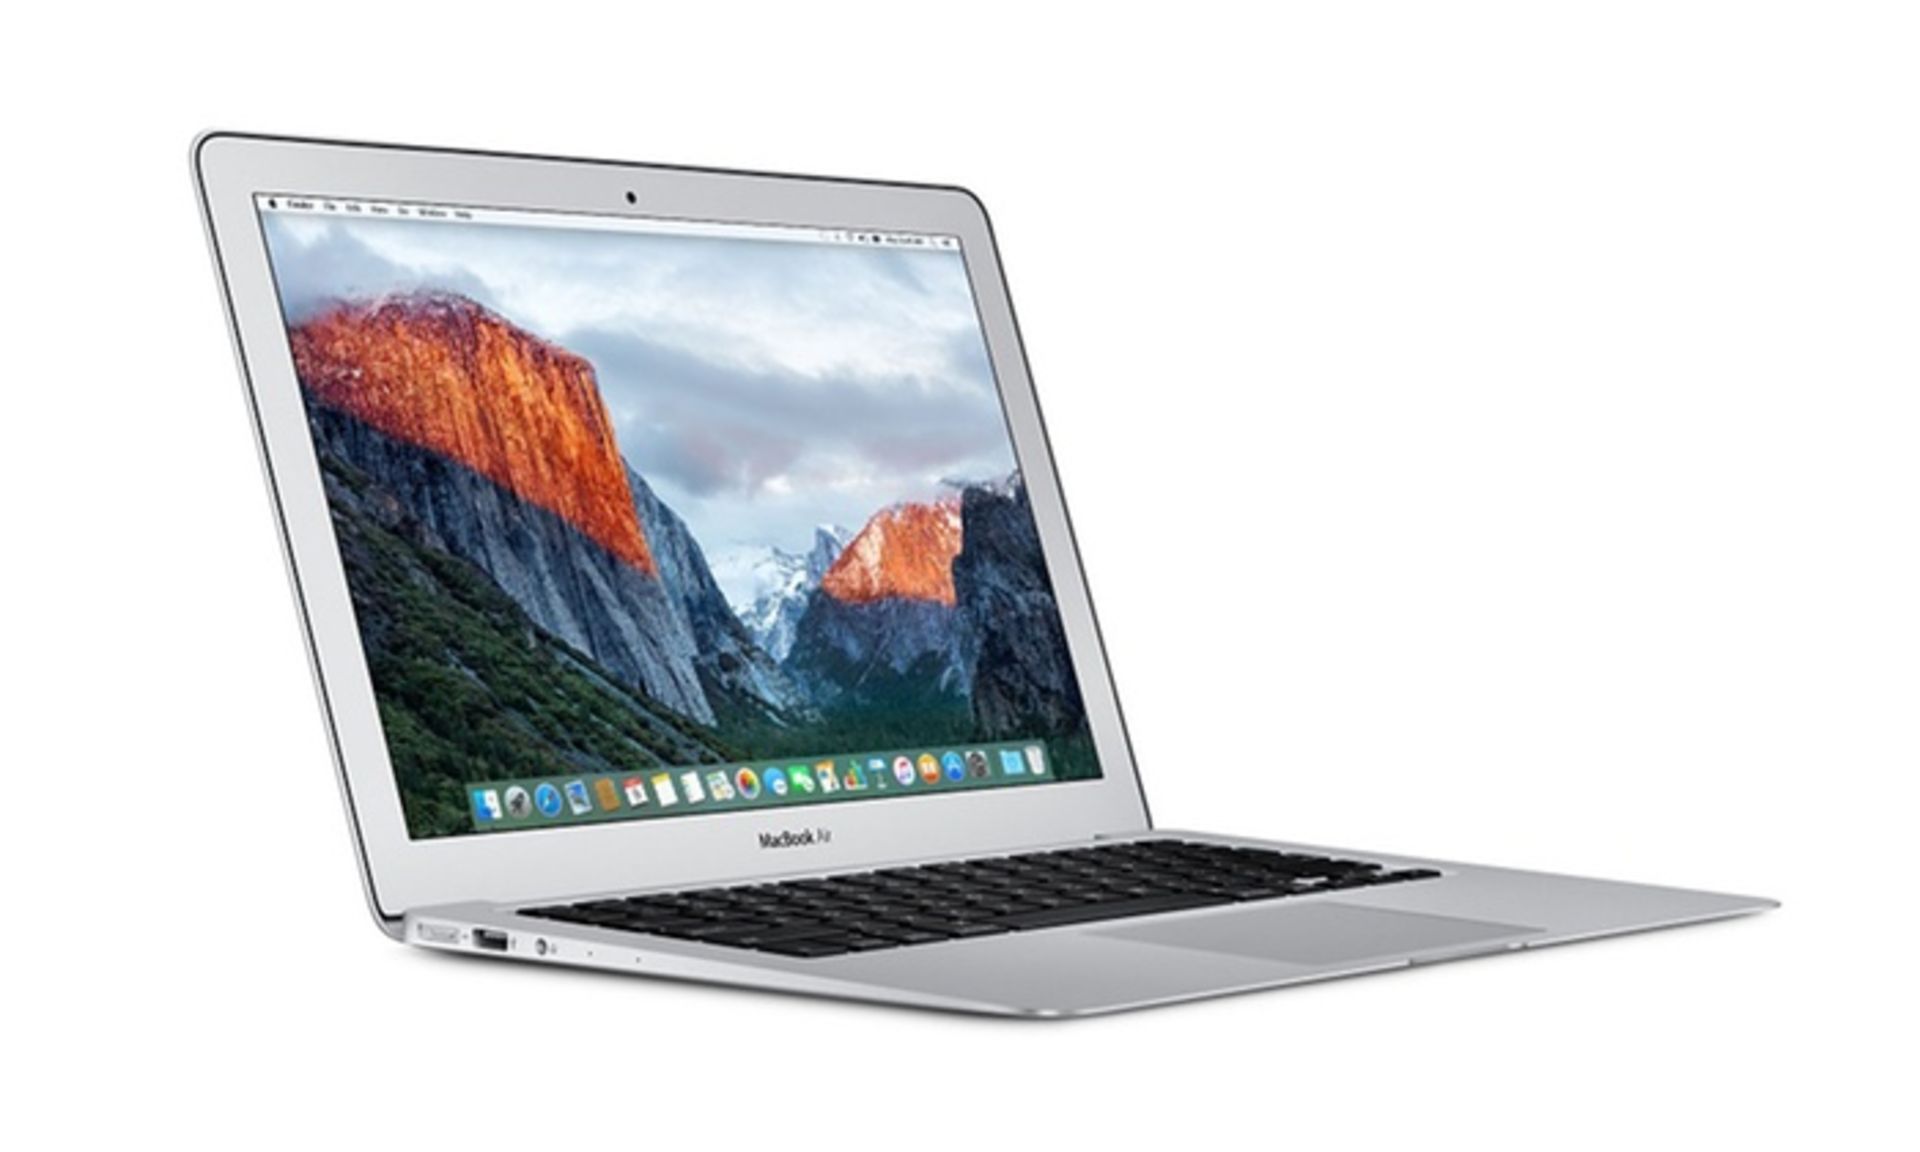 V Brand New Apple MacBook Air A1466 13.3 Inch - Core i5 - 8GB - 128GB SSD - Box Open But Item Is - Image 2 of 2